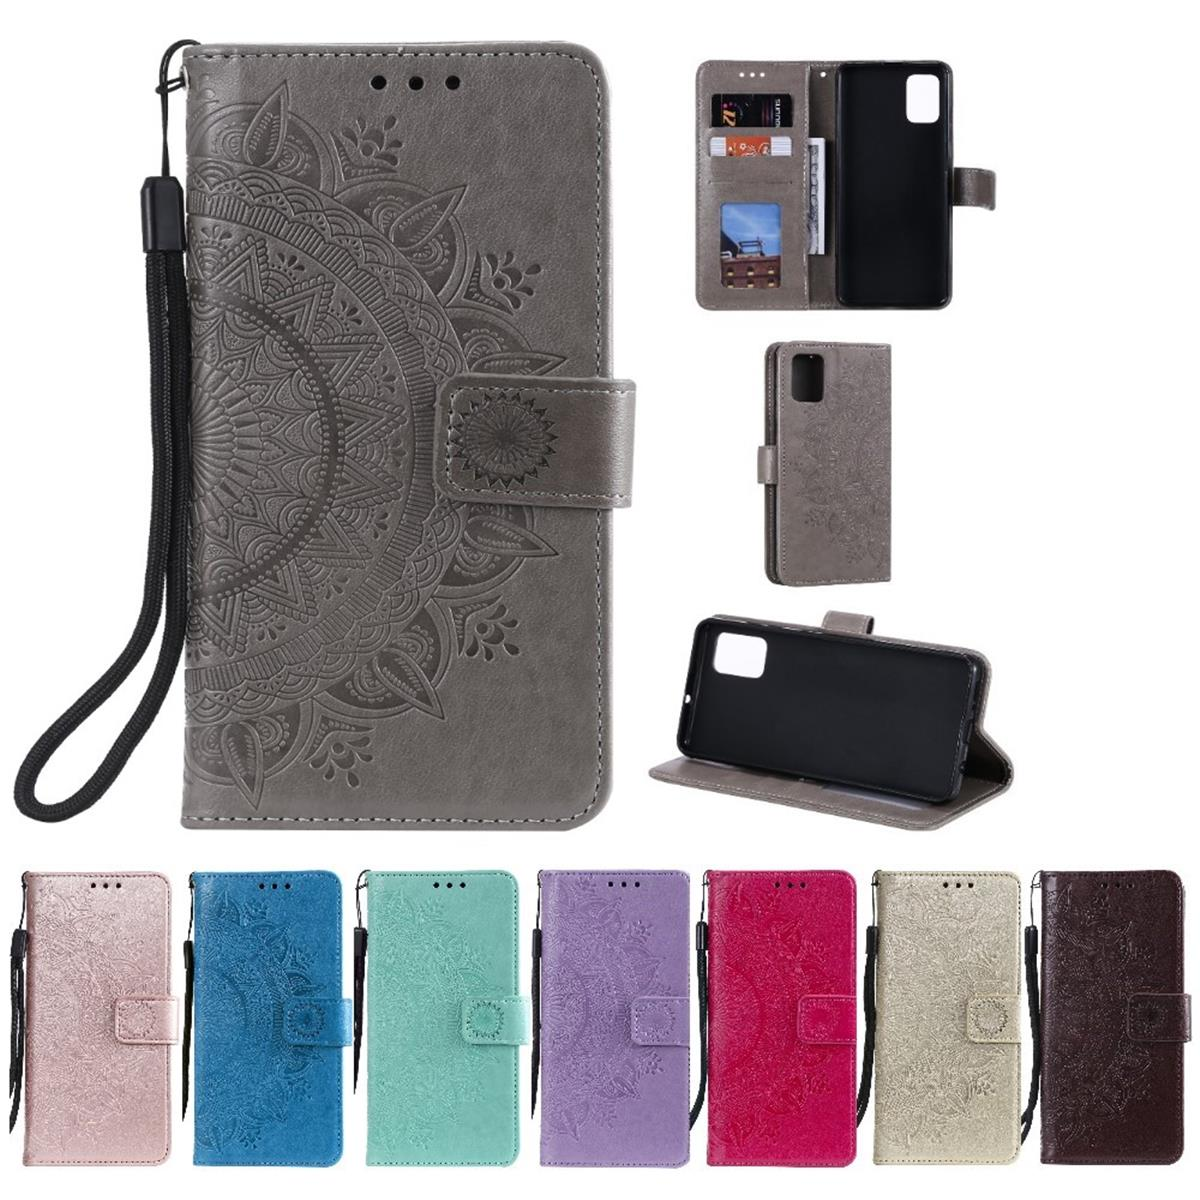 COVERKINGZ Klapphülle mit Mandala Muster, Samsung, A71, Roségold Galaxy Bookcover